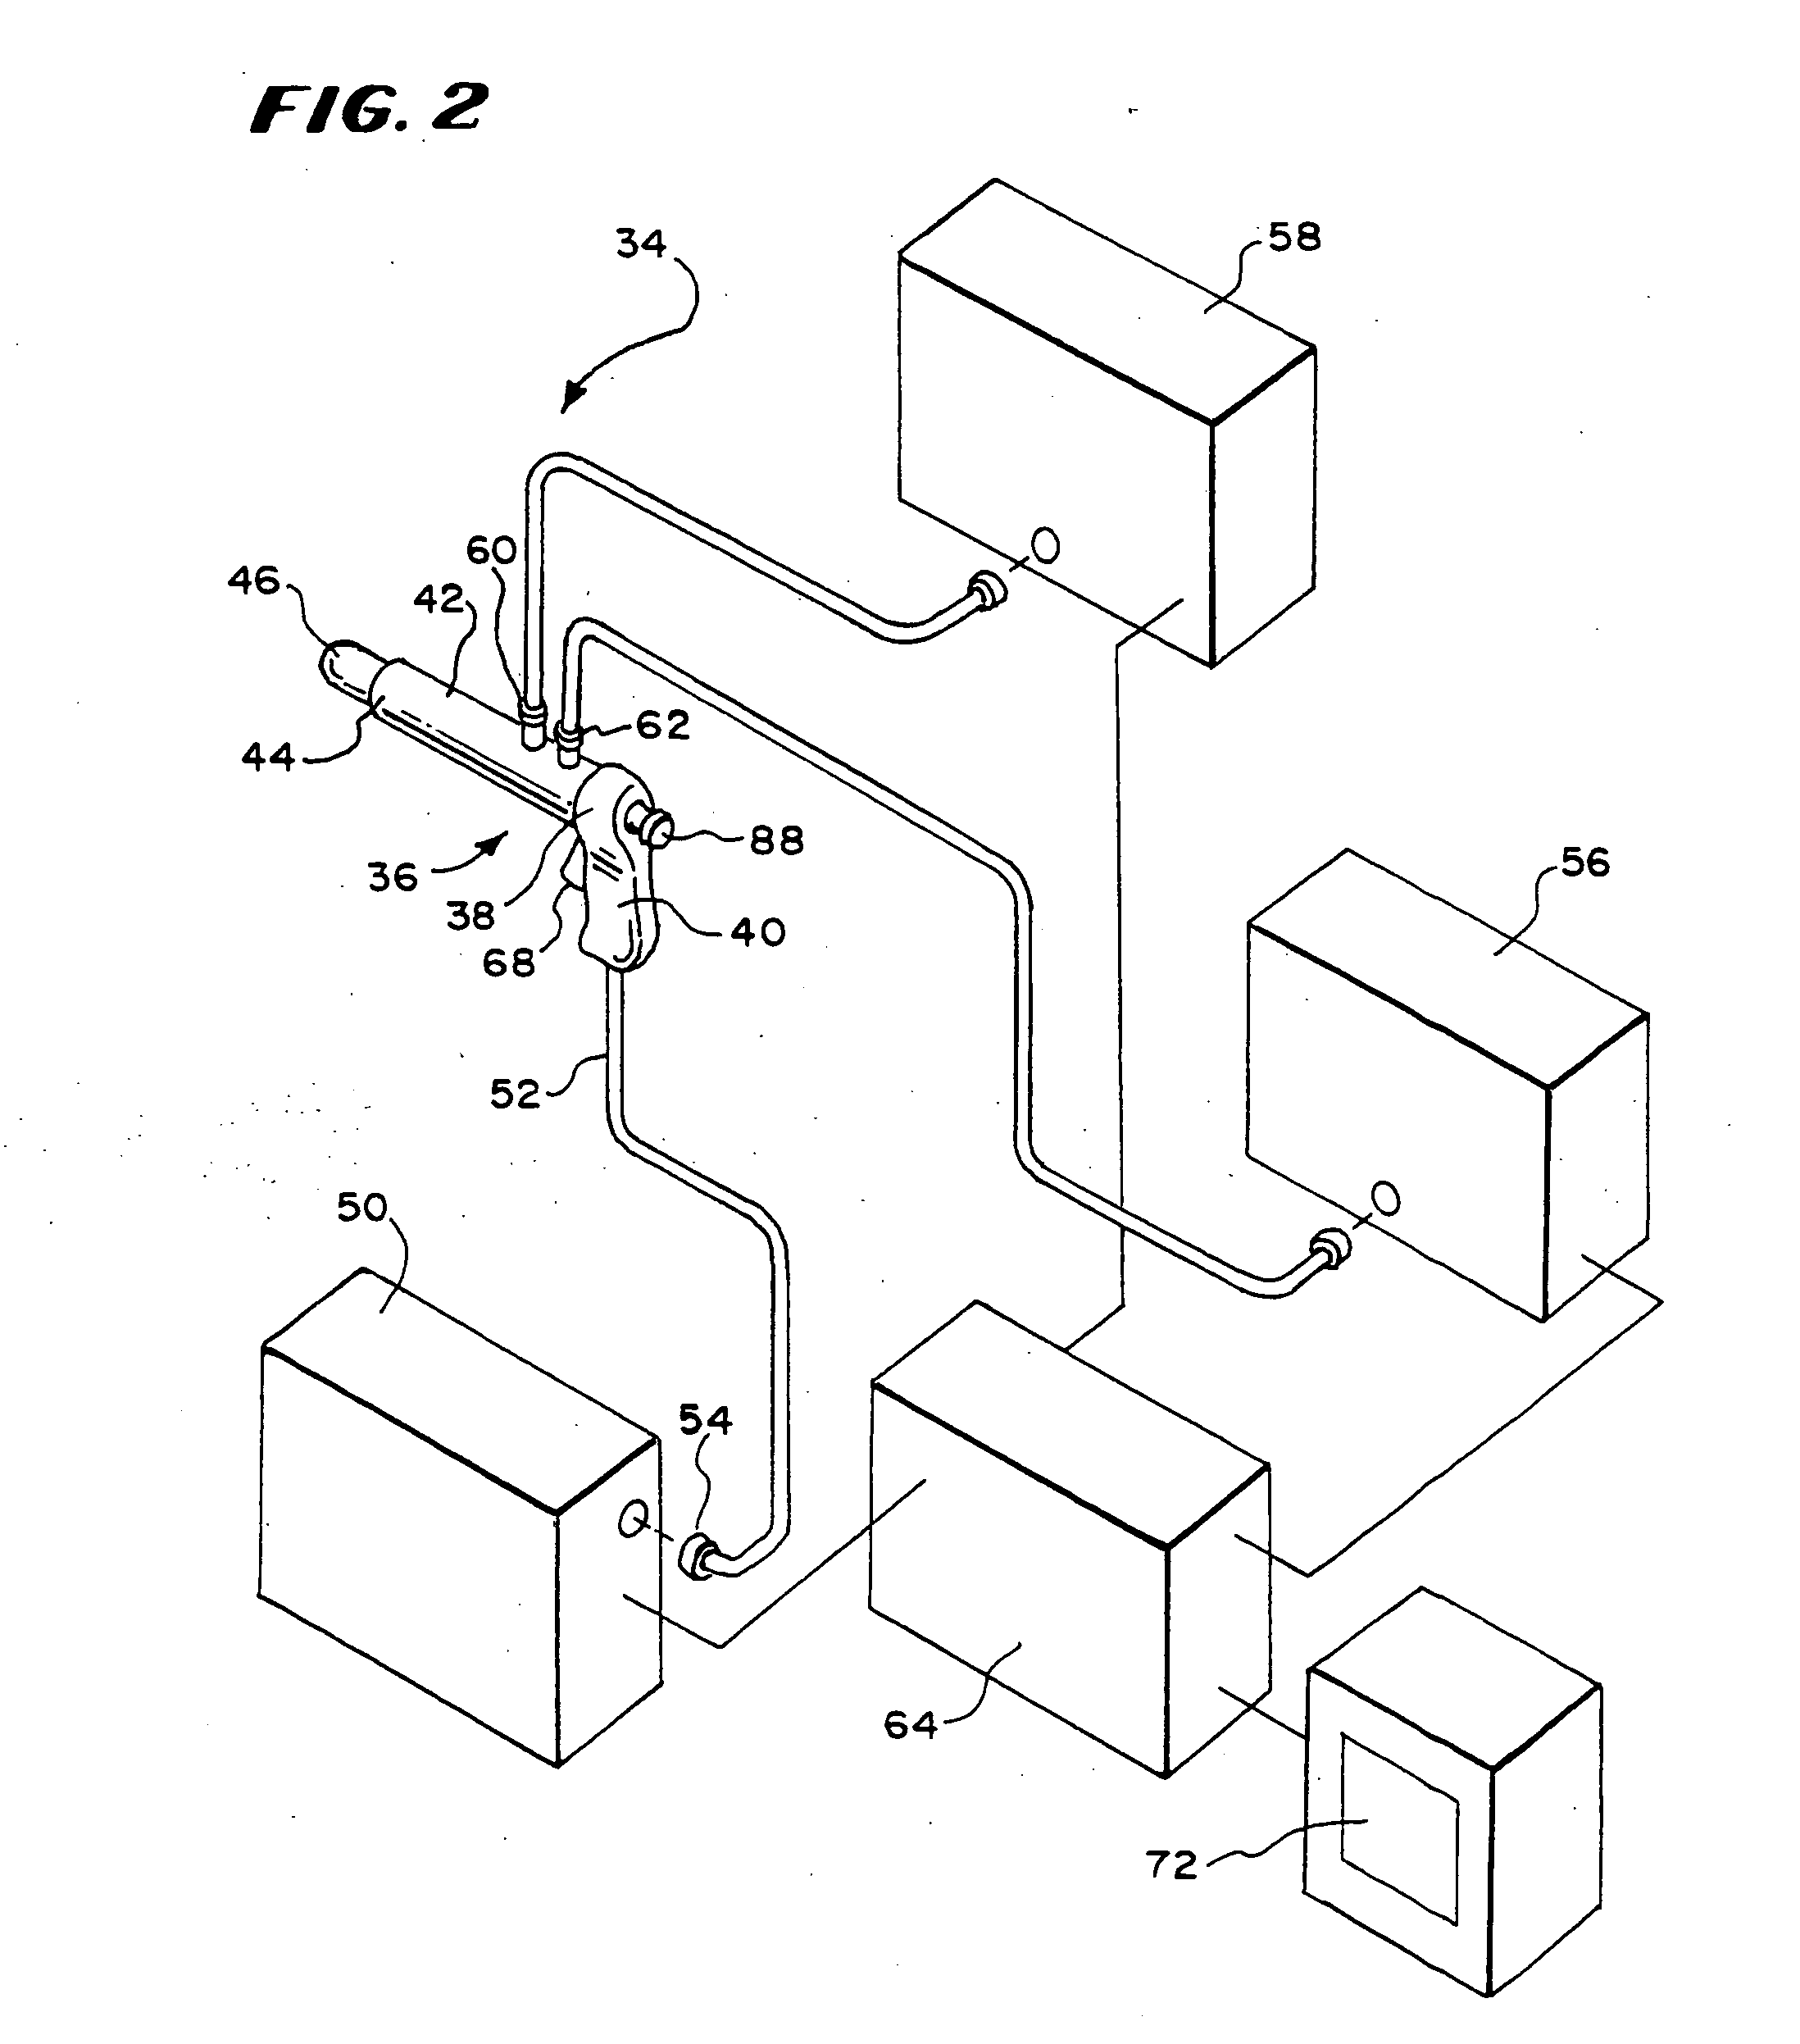 Method for treating fecal incontinence